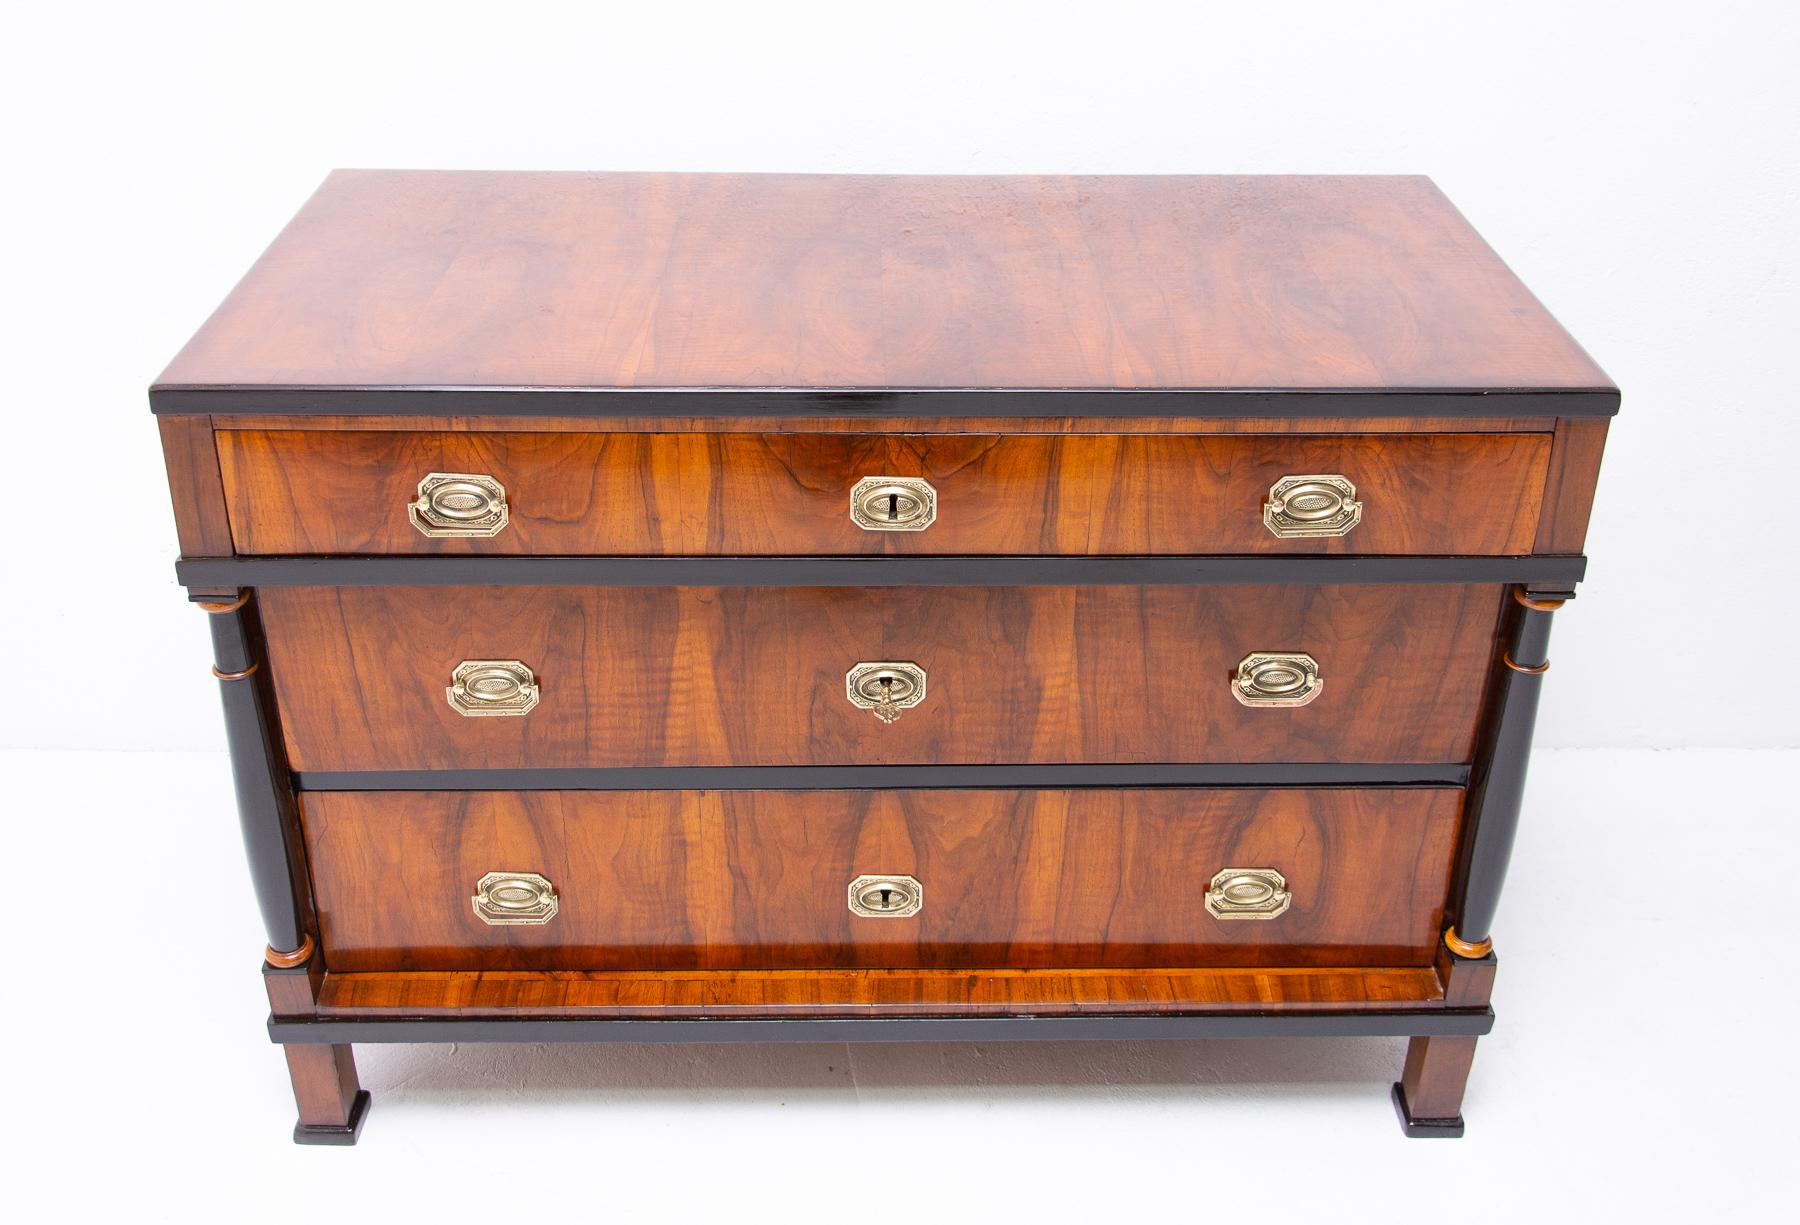 A chest of drawers from the Biedermeier period, made in the 1830s and featuring a walnut veneer and decorative motifs typical for this period. This bookcase has been professionally refurbished using shellac polish and remains fully functional in